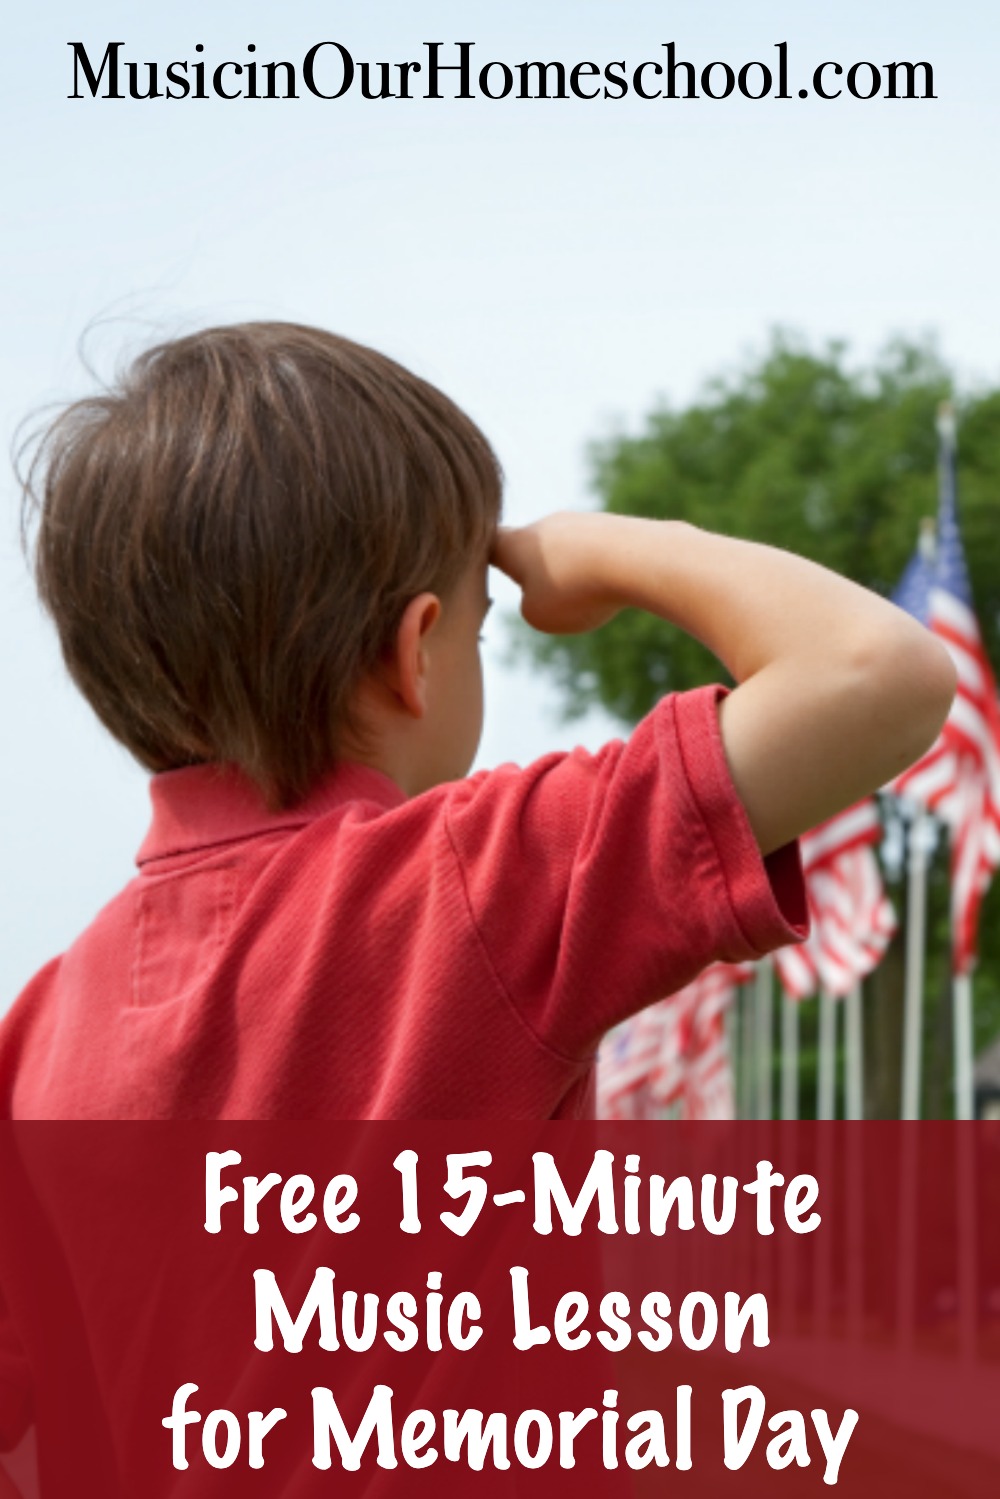 Use this Free 15-Minute Music Lesson for Memorial Day with your elementary students at home or at school to learn about the holiday with great music to honor those who gave their lives for our freedom. #music #musiclesson #musicinourhomeschool #memorialday